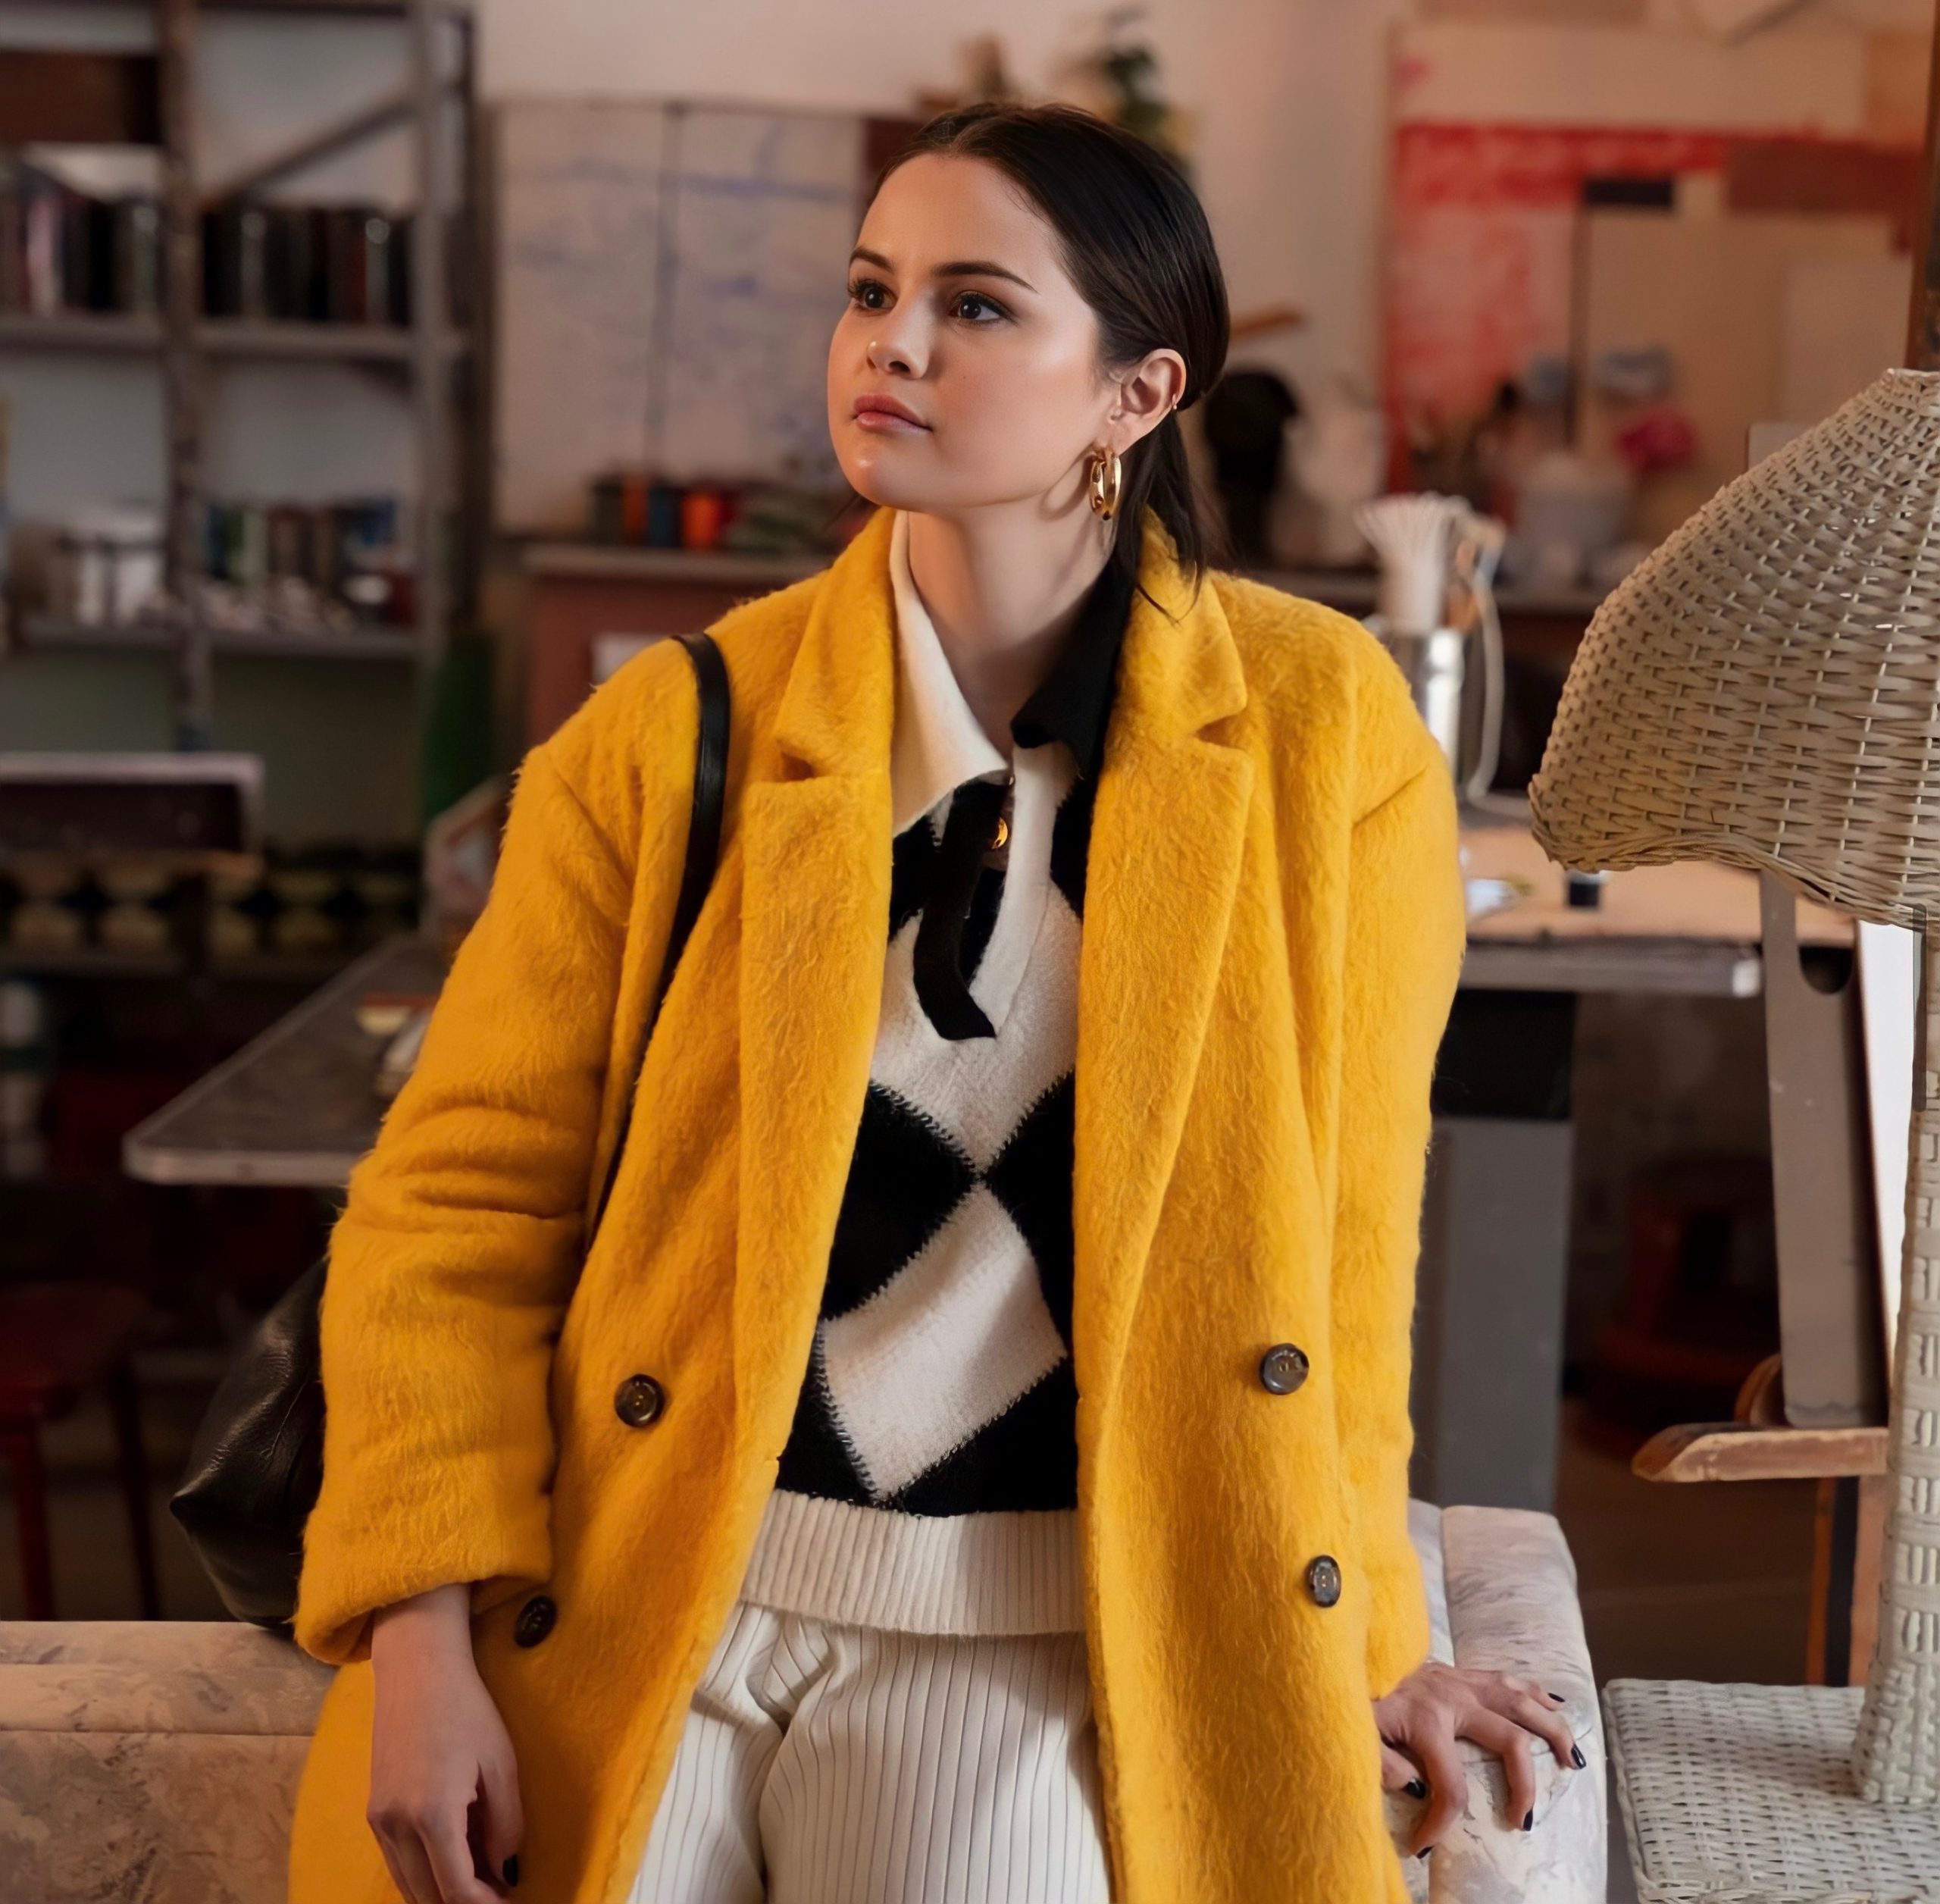 Selena Gomez wearing yellow coat by Cinq a Sept and black and white harlequin sweater by & Other Stories in Only Murders in the Building